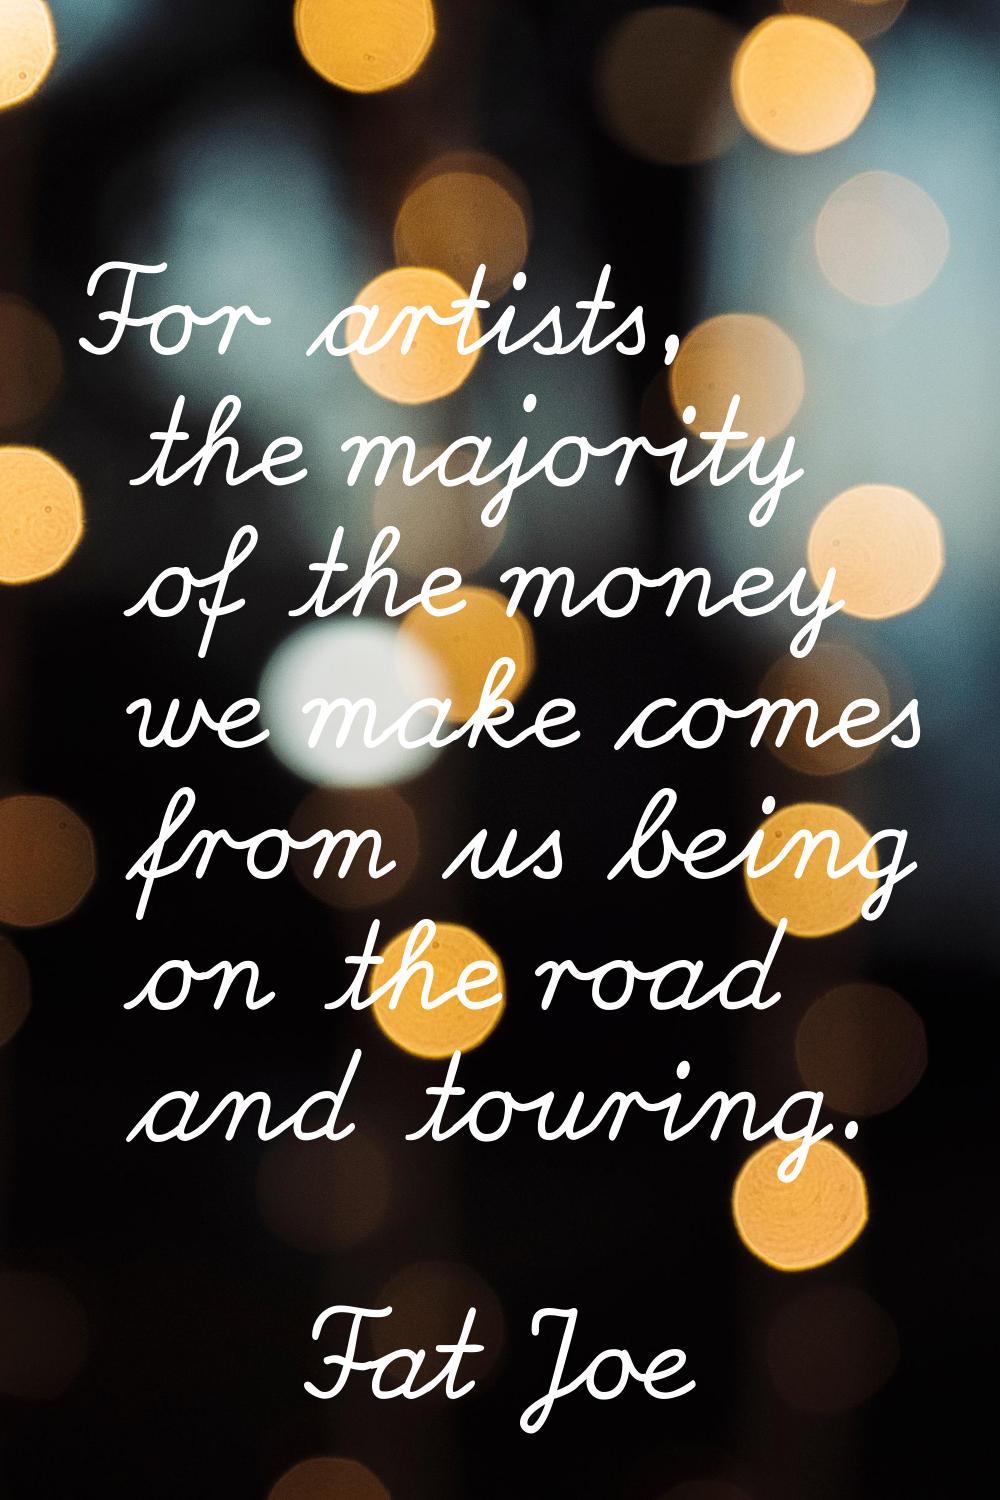 For artists, the majority of the money we make comes from us being on the road and touring.